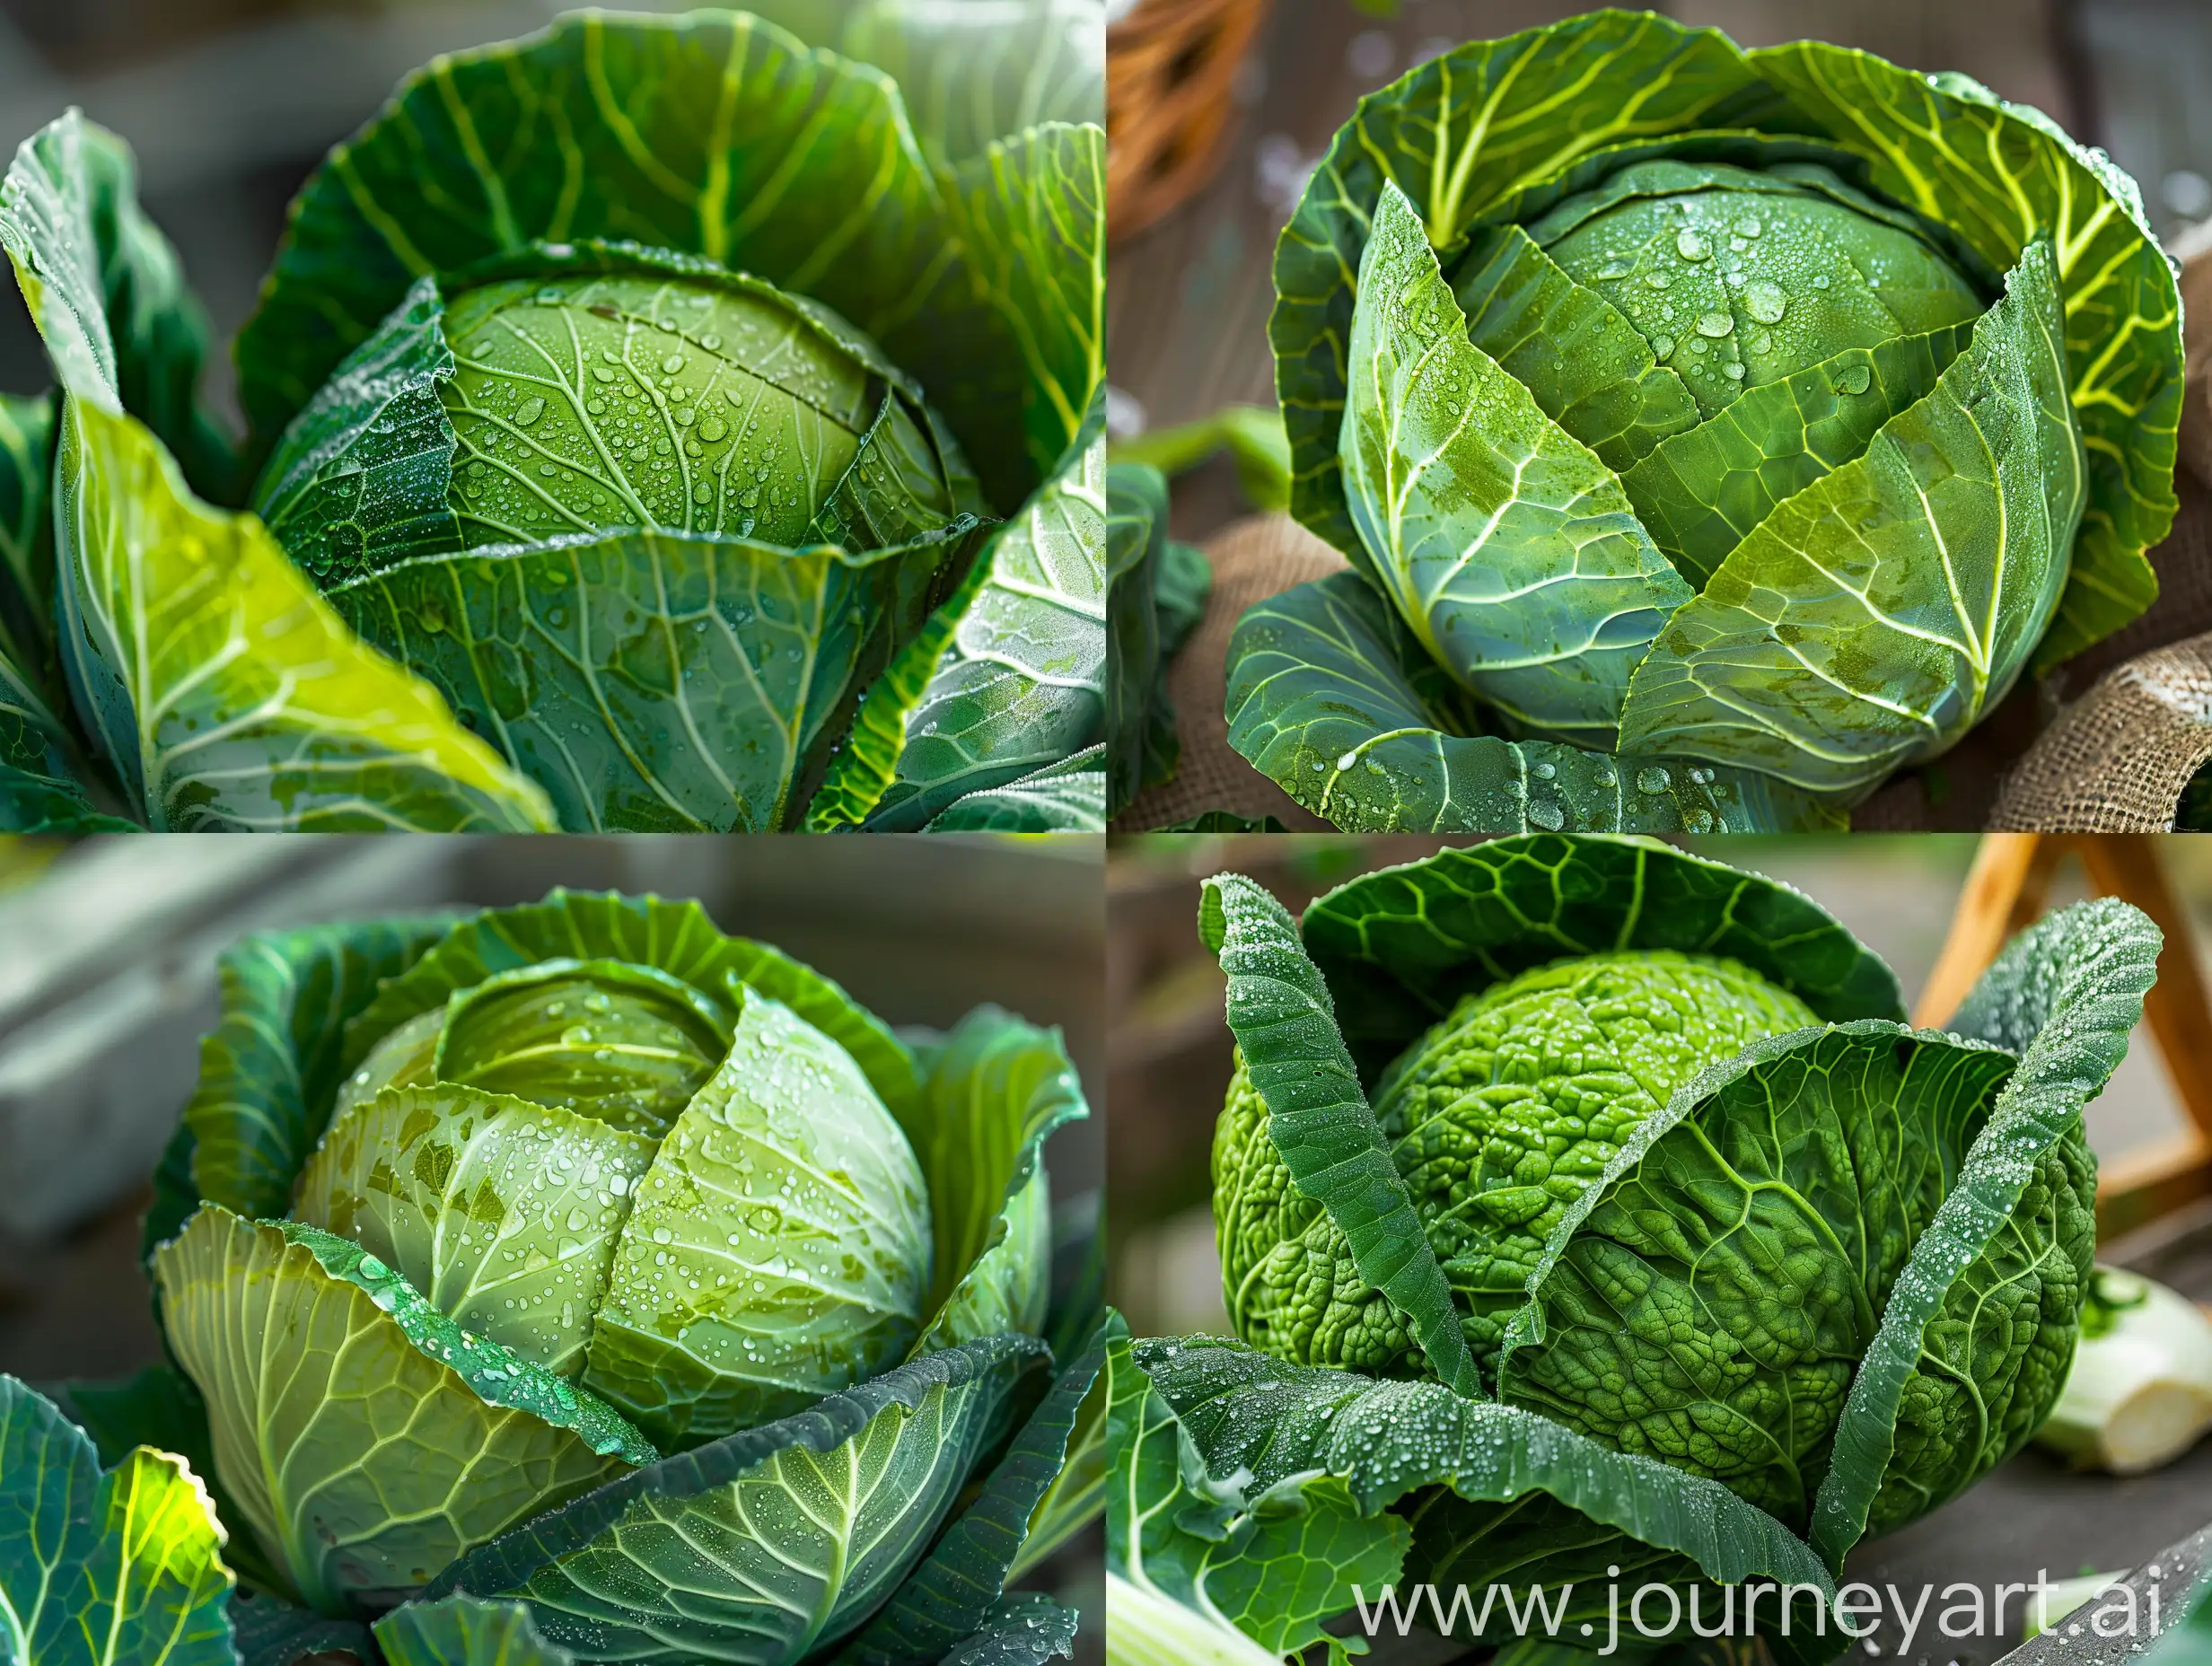 Close-up view of a beautiful cabbage head with dew droplets on the green fresh leaves in an organic farm (a leafy plant grown as an annual vegetable, rich in vitamins, minerals and dietary fiber)